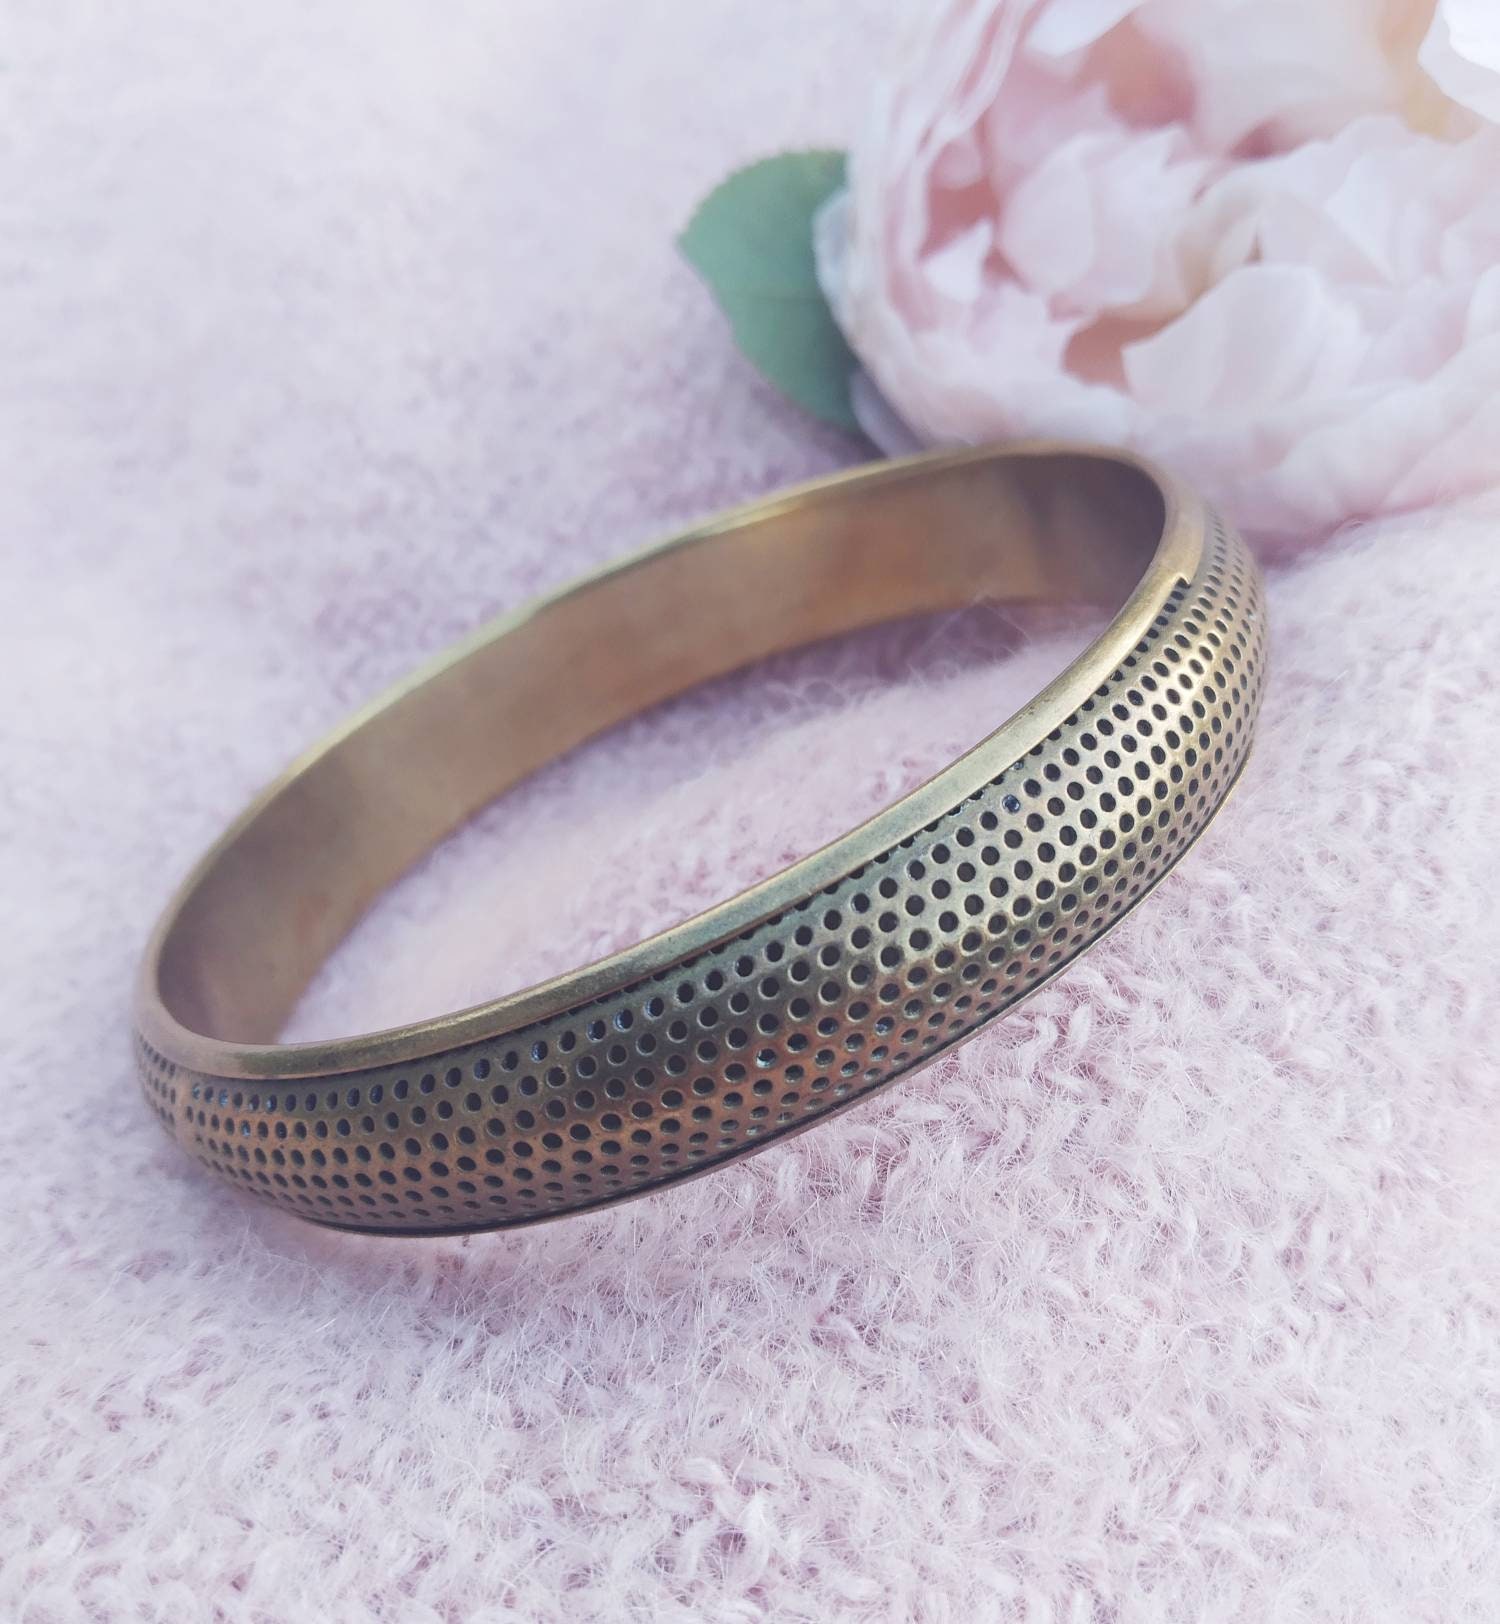 Vintage perforated bracelet brass bangle in punched hole - Etsy 日本